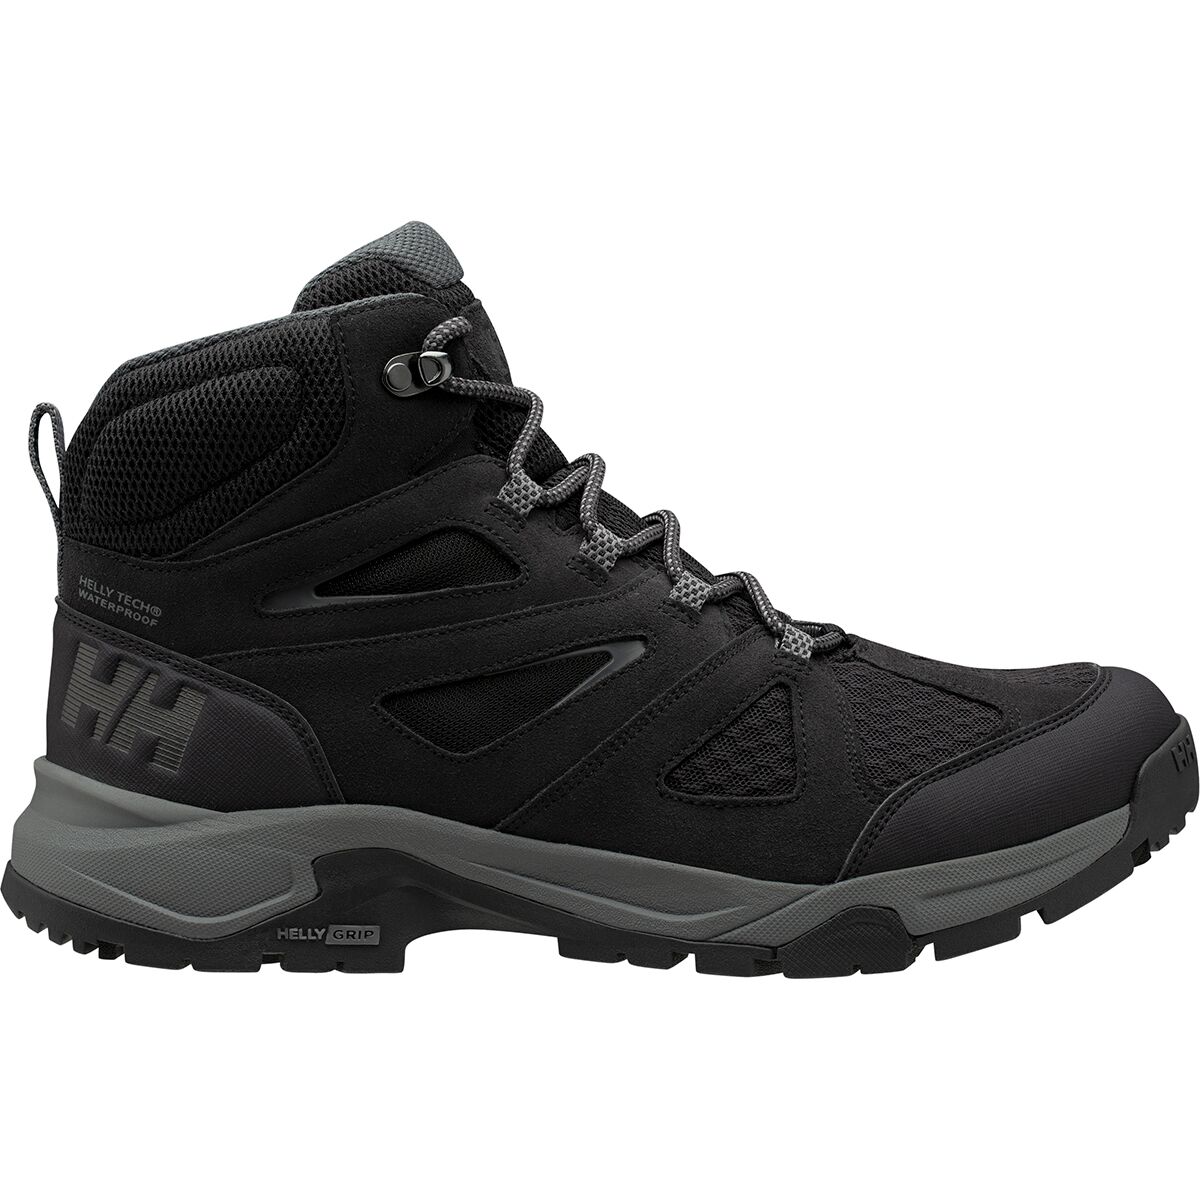 Switchback Trail HT Hiking Boot - Men